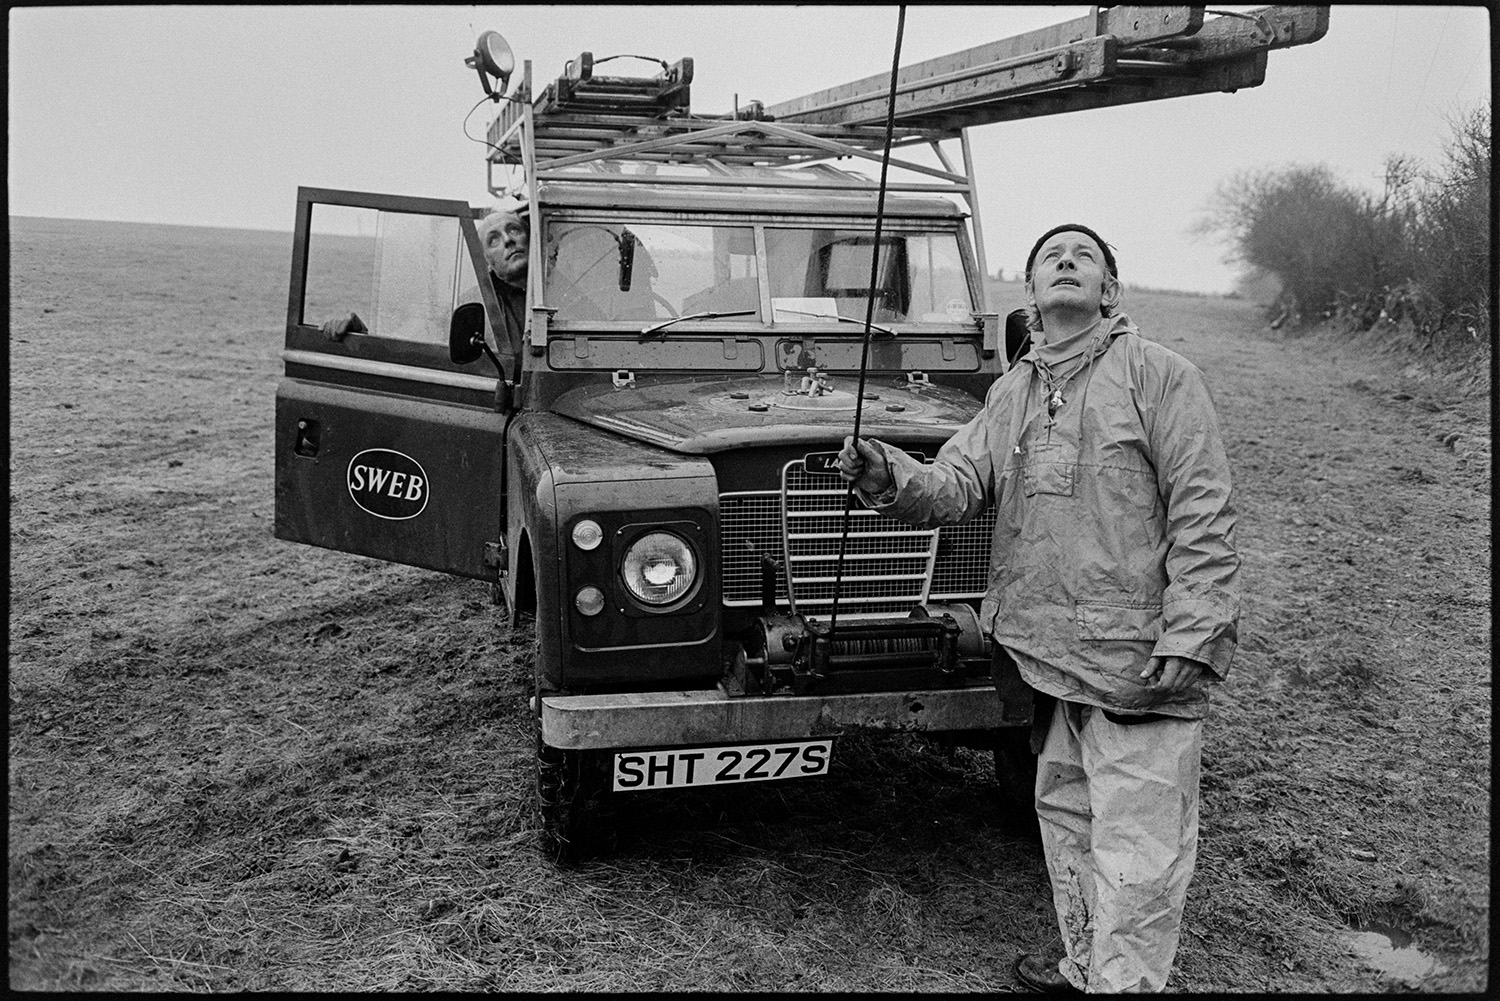 Men replacing electricity power lines, Land Rover and drums of cable. 
[Men from SWEB replacing electricity power cables at Dolton. They are in a field with a Land Rover. One of the men is holding a cable attached to the Land Rover.]